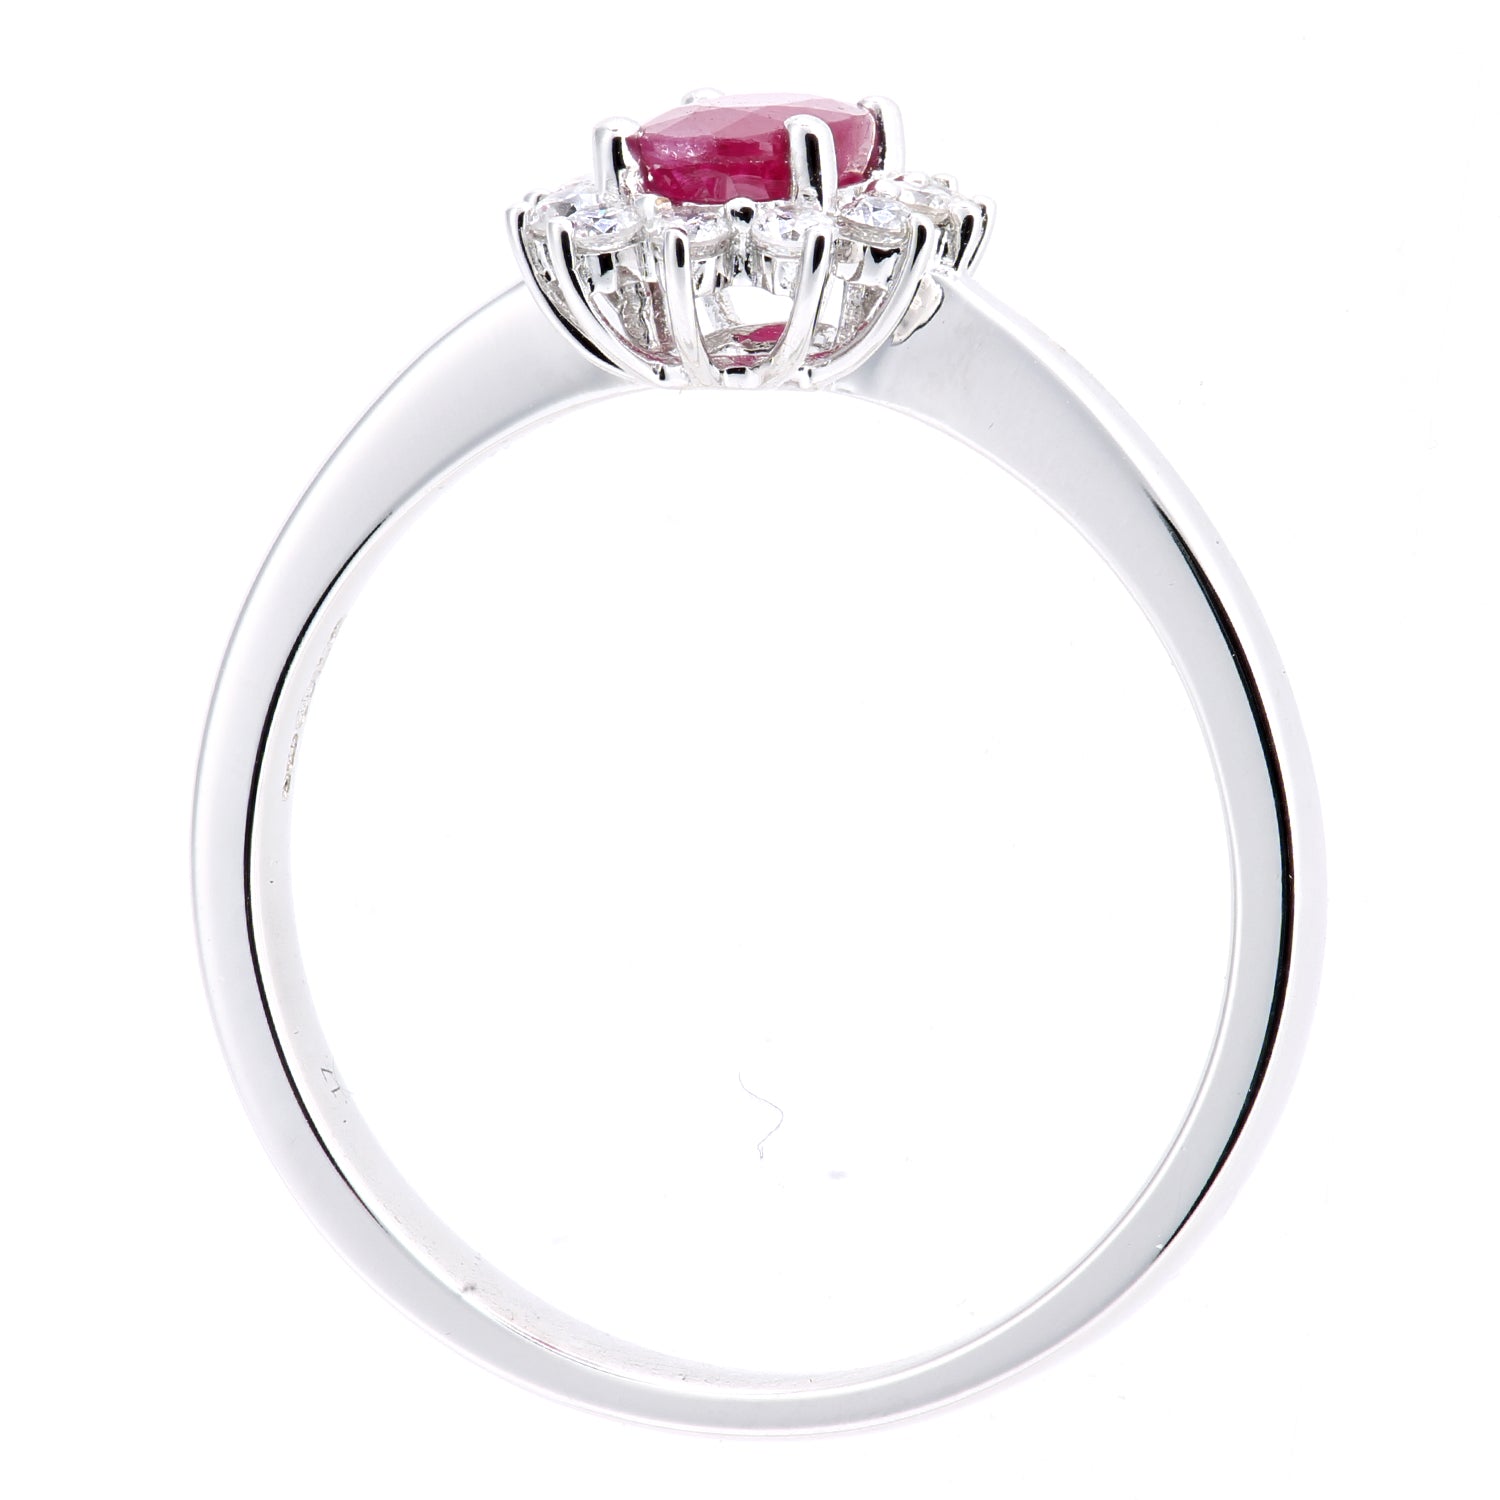 18ct White Gold  Diamond Oval Ruby Royal Oval  Clock Cluster Ring - DR1AXL605W18RU